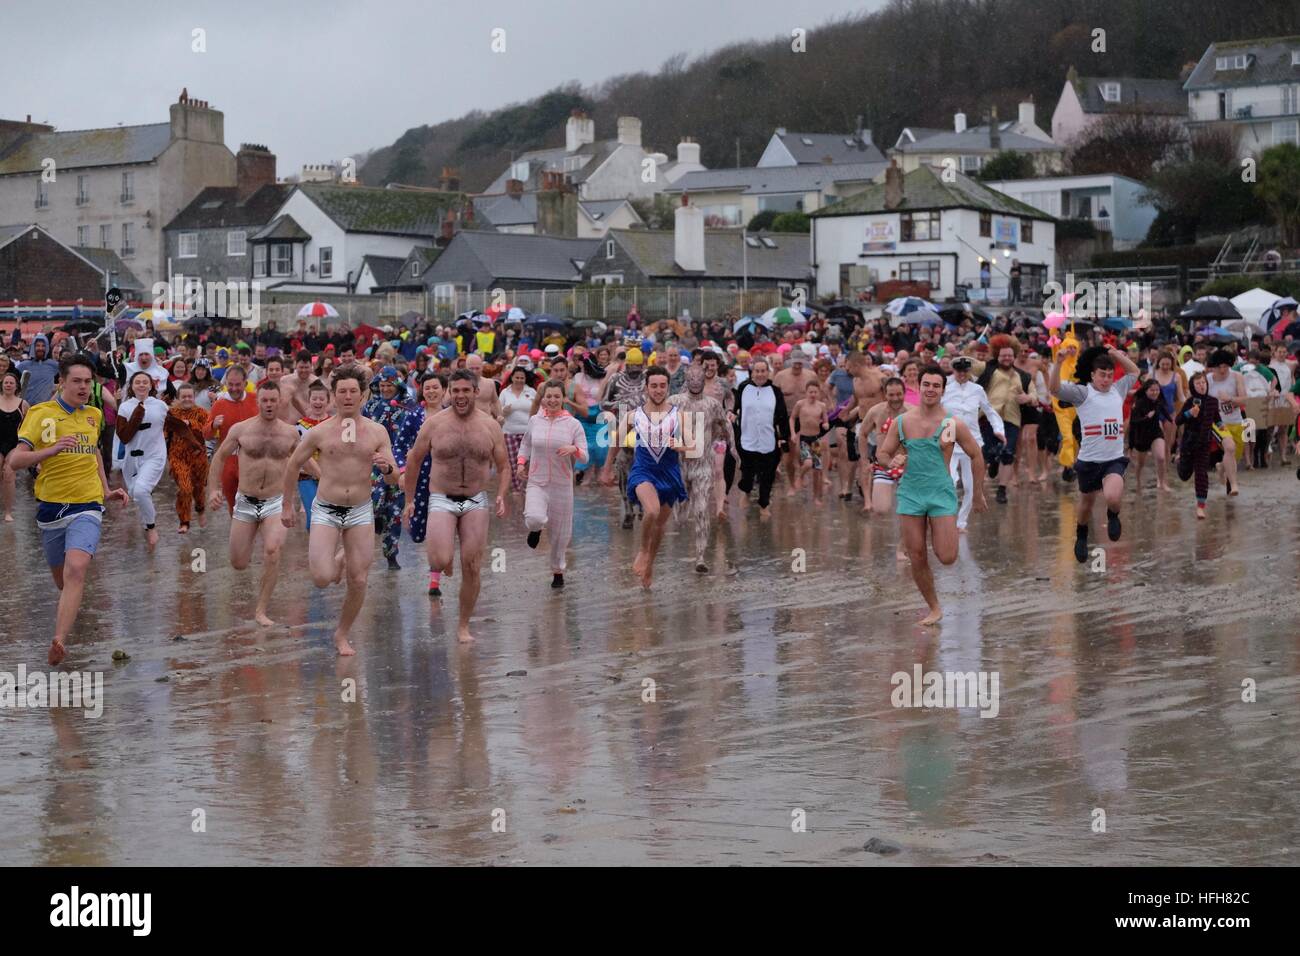 Lyme Regis, Dorset, UK. 1st Jan, 2017. Hundreds of New Year revellers take to the sea in the “Lyme Lunge” to raise funds for Macmillan Cancer Support. The annual event was watched by over a thousand spectators who gathered on Lyme Regis Cobb Beach to support the event. © Tom Corban/Alamy Live News Stock Photo